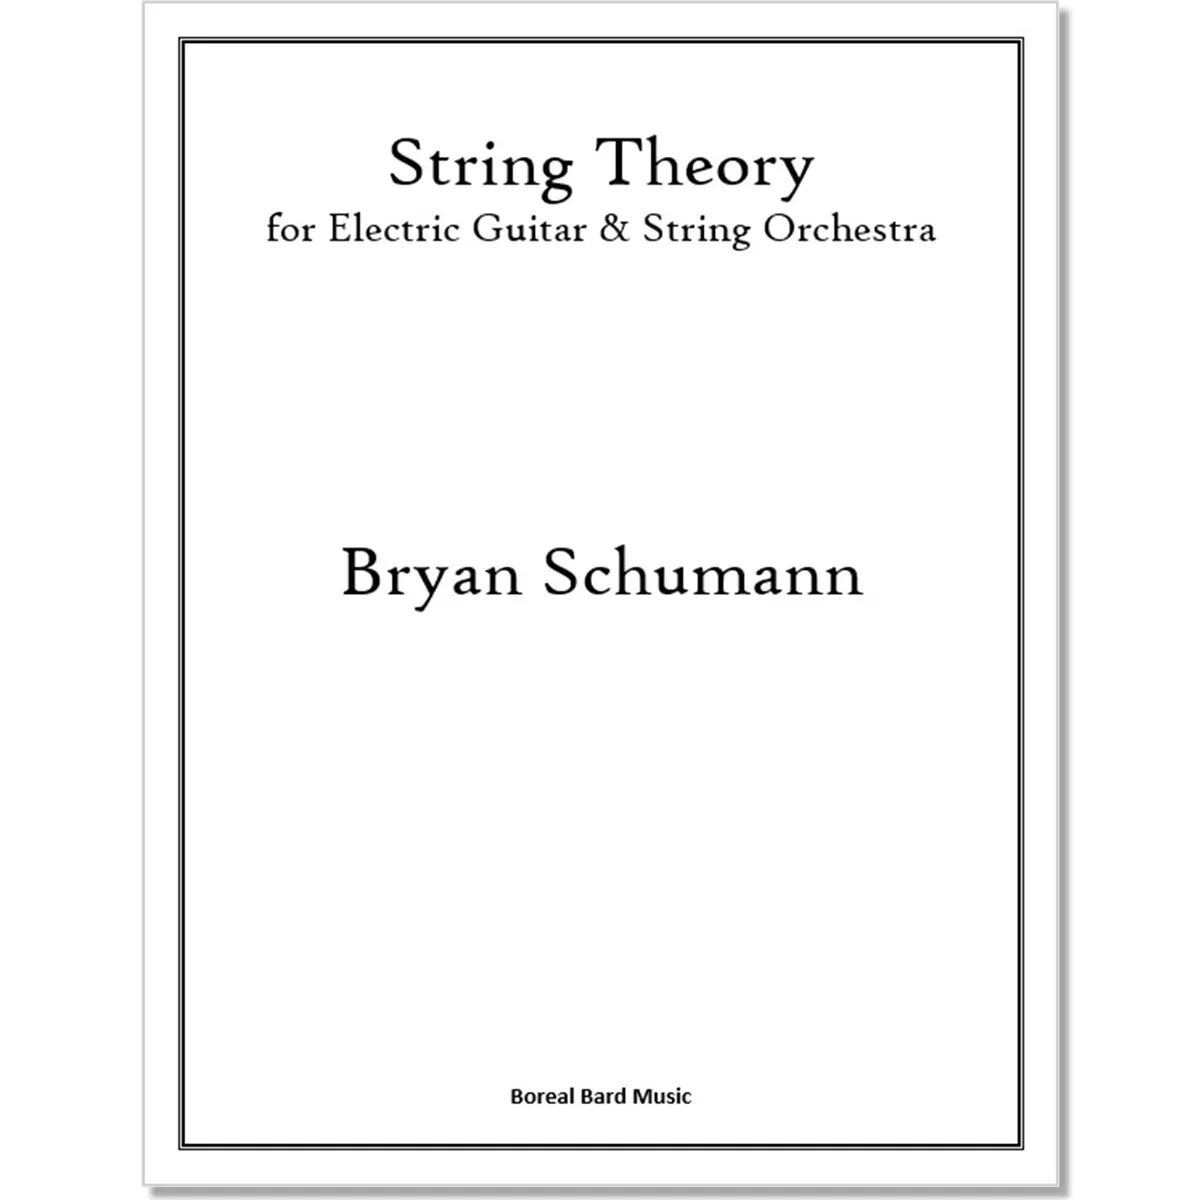 String Theory for Electric Guitar & String Orchestra (sheet music)